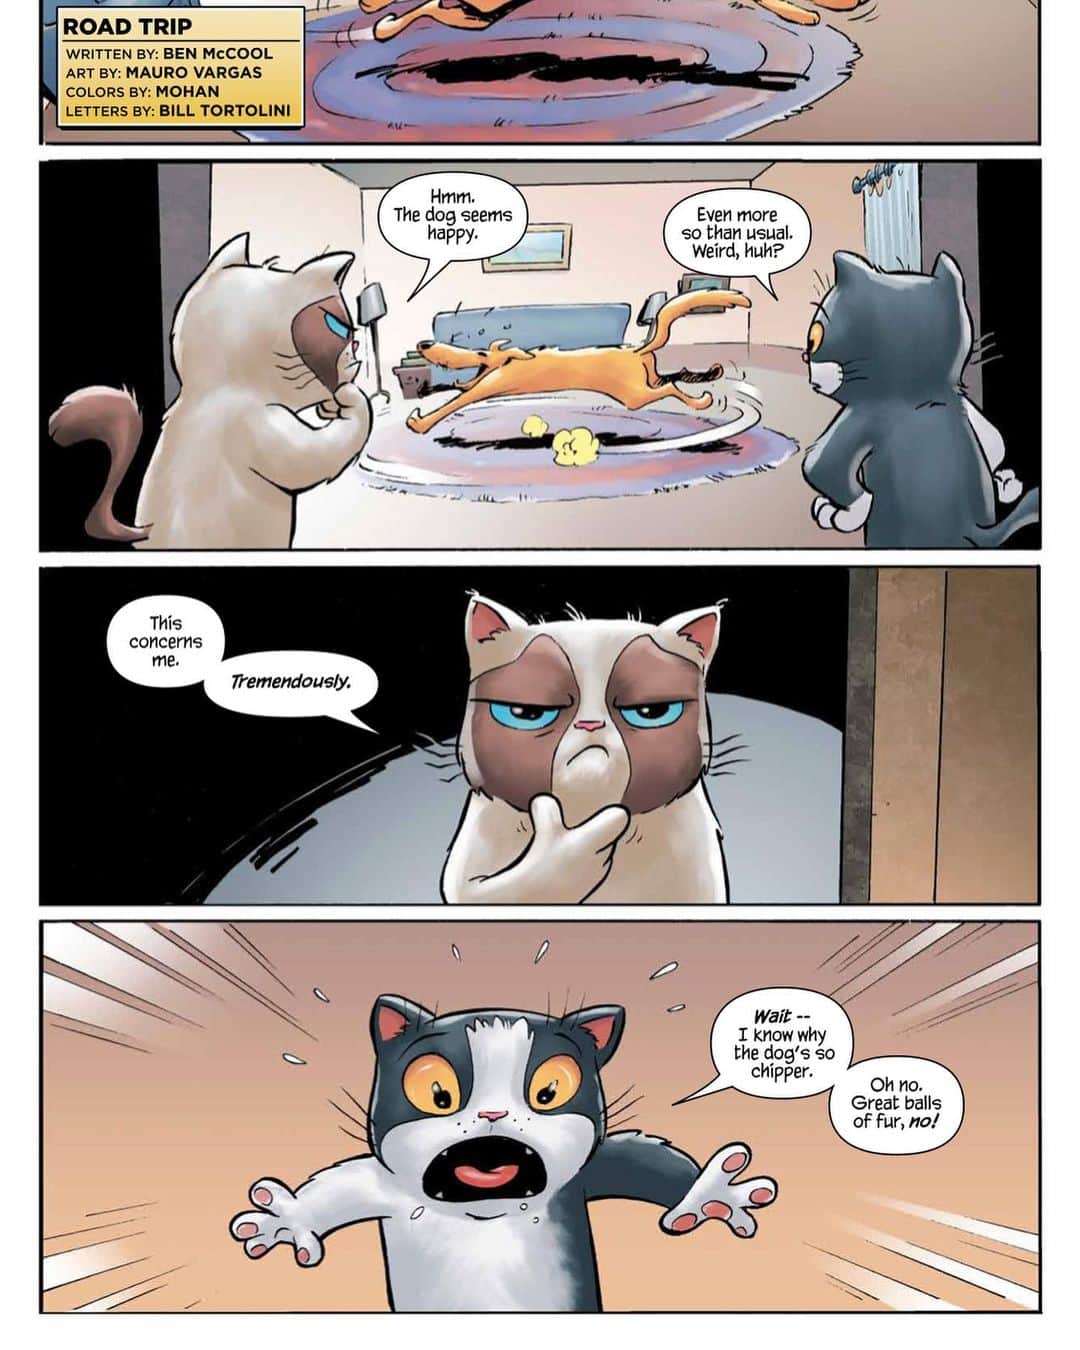 Grumpy Catさんのインスタグラム写真 - (Grumpy CatInstagram)「Terrible Gift Idea: Grumpy Cat’s Awful-ly Big Comic Collection! Out Now at @amazon & wherever Comics and Graphic Novels are sold! Amazon: https://grumpy.cat/grumpycatcomic (Link in Story!) Comic Shops: https://www.comicshoplocator.com/  #christmas #giftideas #christmasgifts #comics #comic #comicbooks #newcomicbookday #comicbookart #graphicnovel #grumpycat #catsofinstagram」12月15日 8時51分 - realgrumpycat